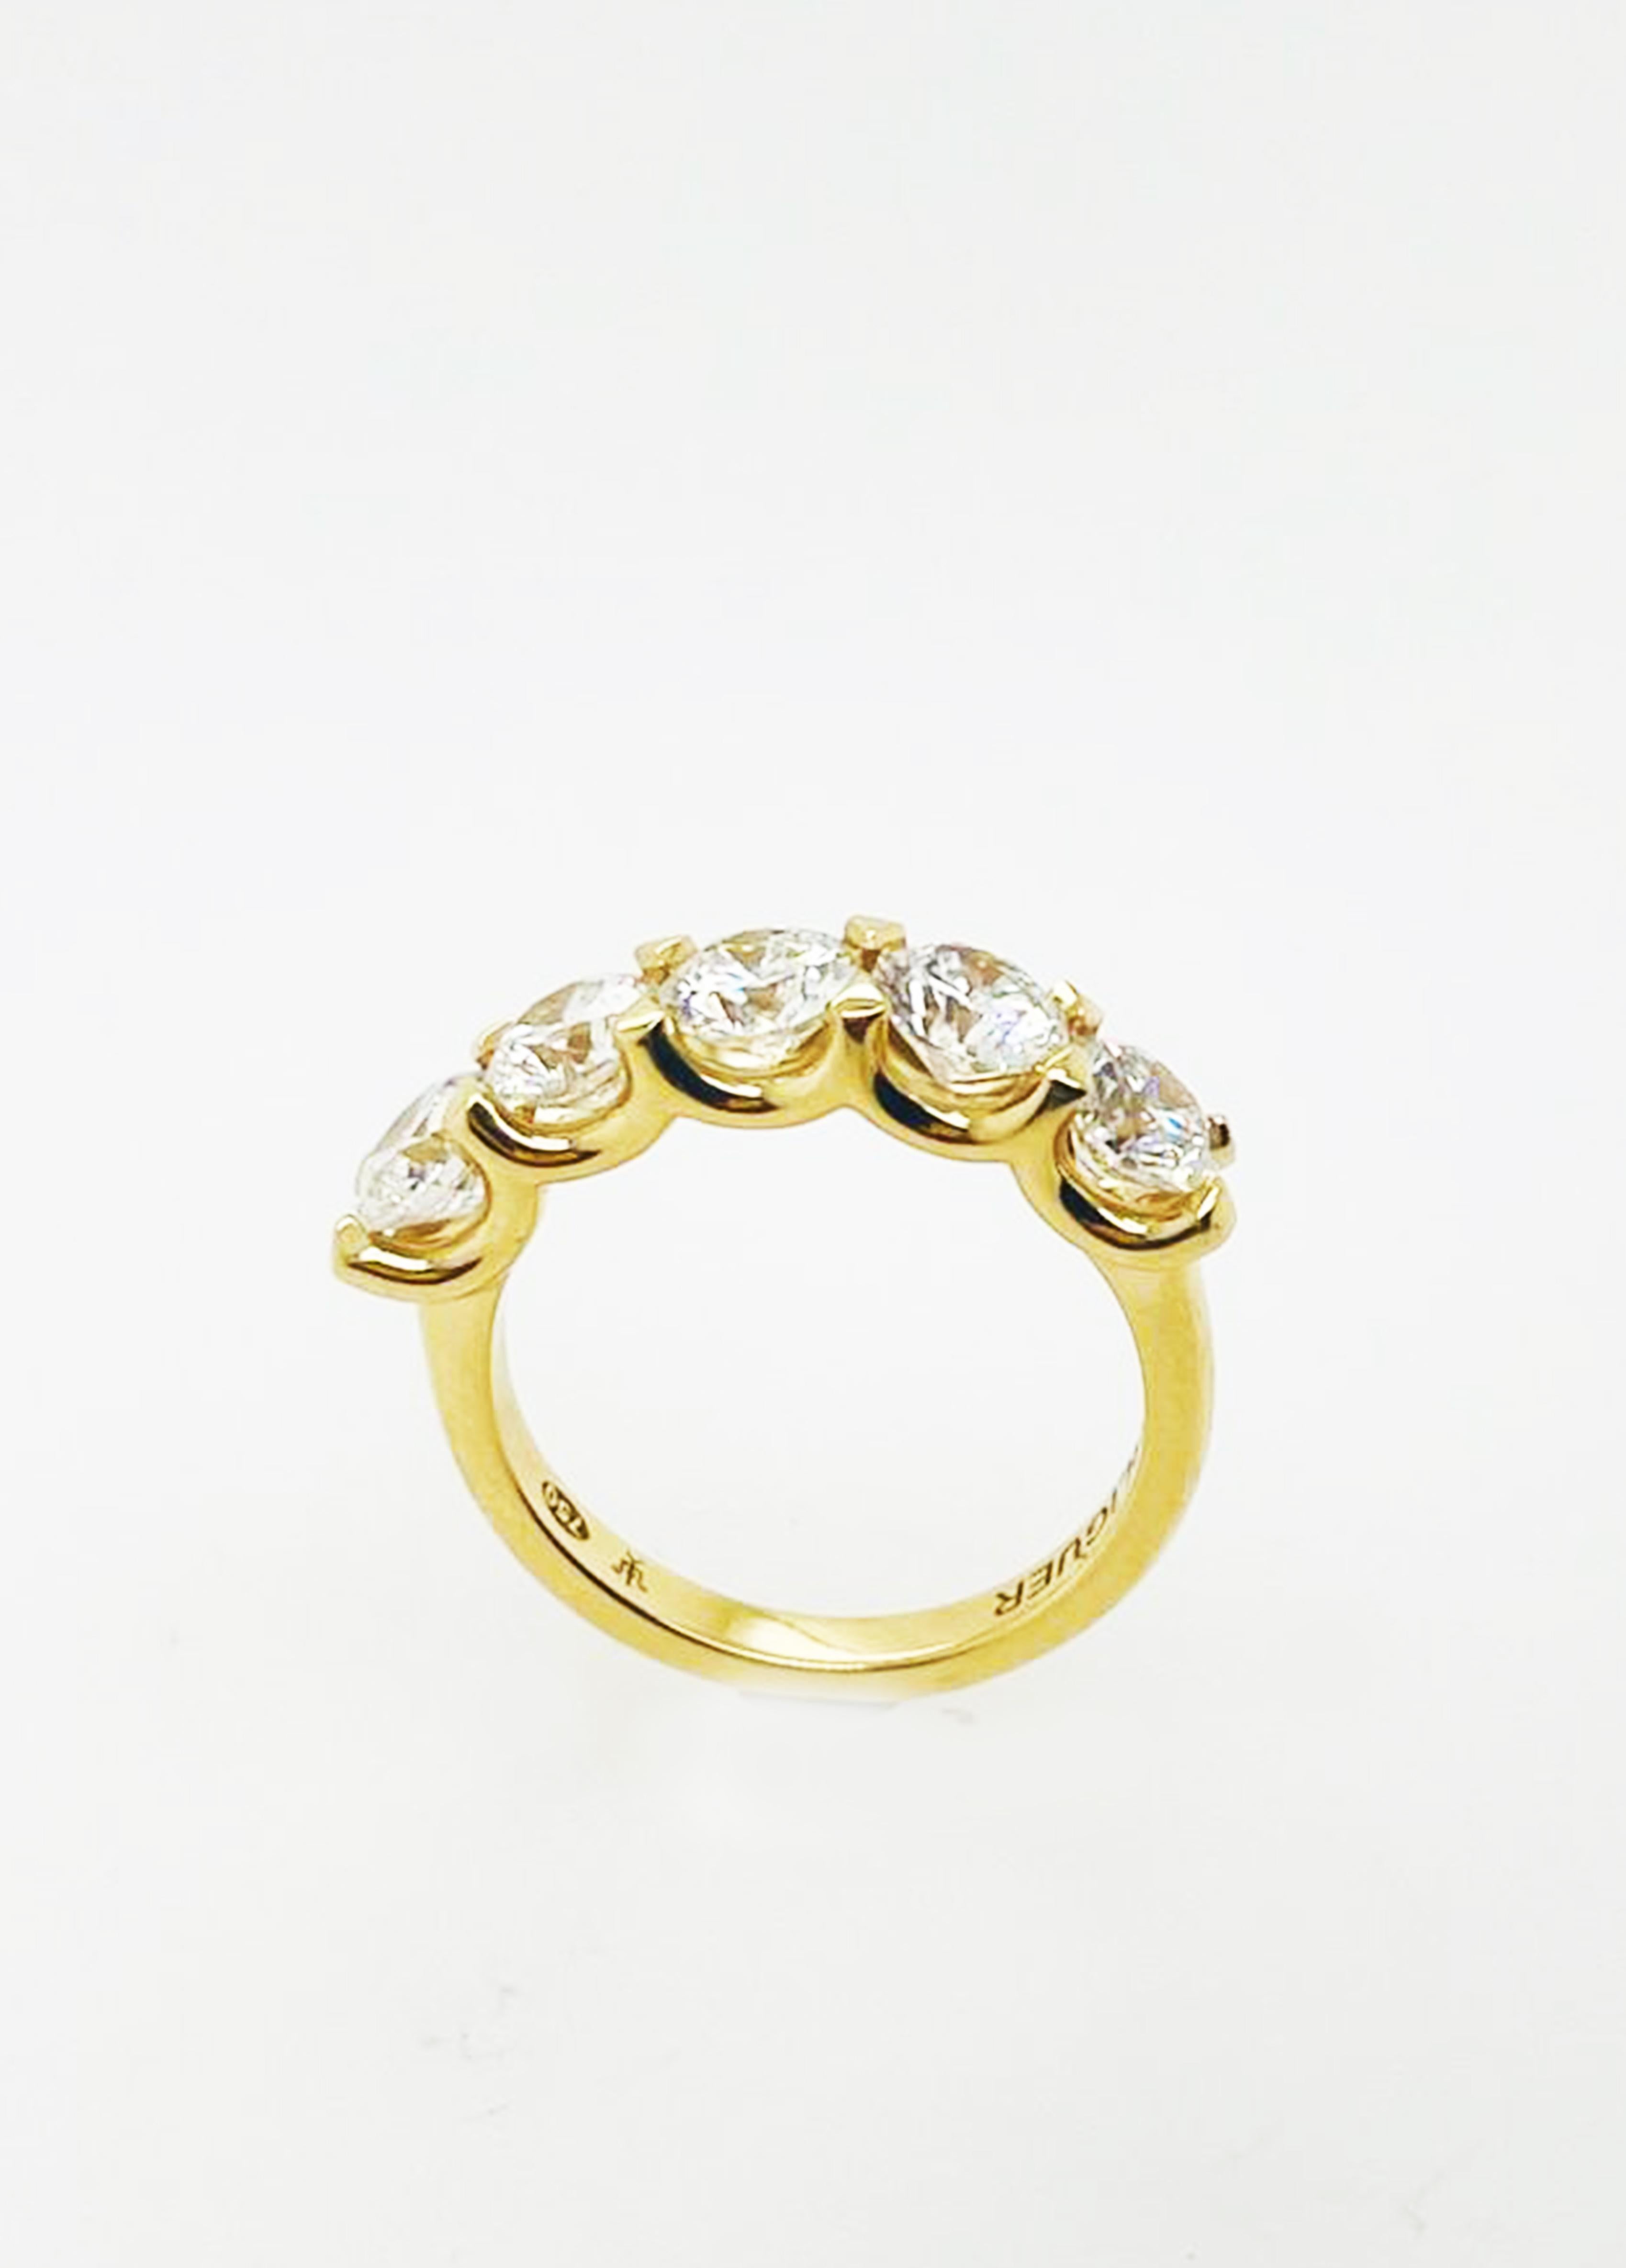 Round Cut 2.50ct White Diamond ring set in 18ct yellow gold Eternity band For Sale